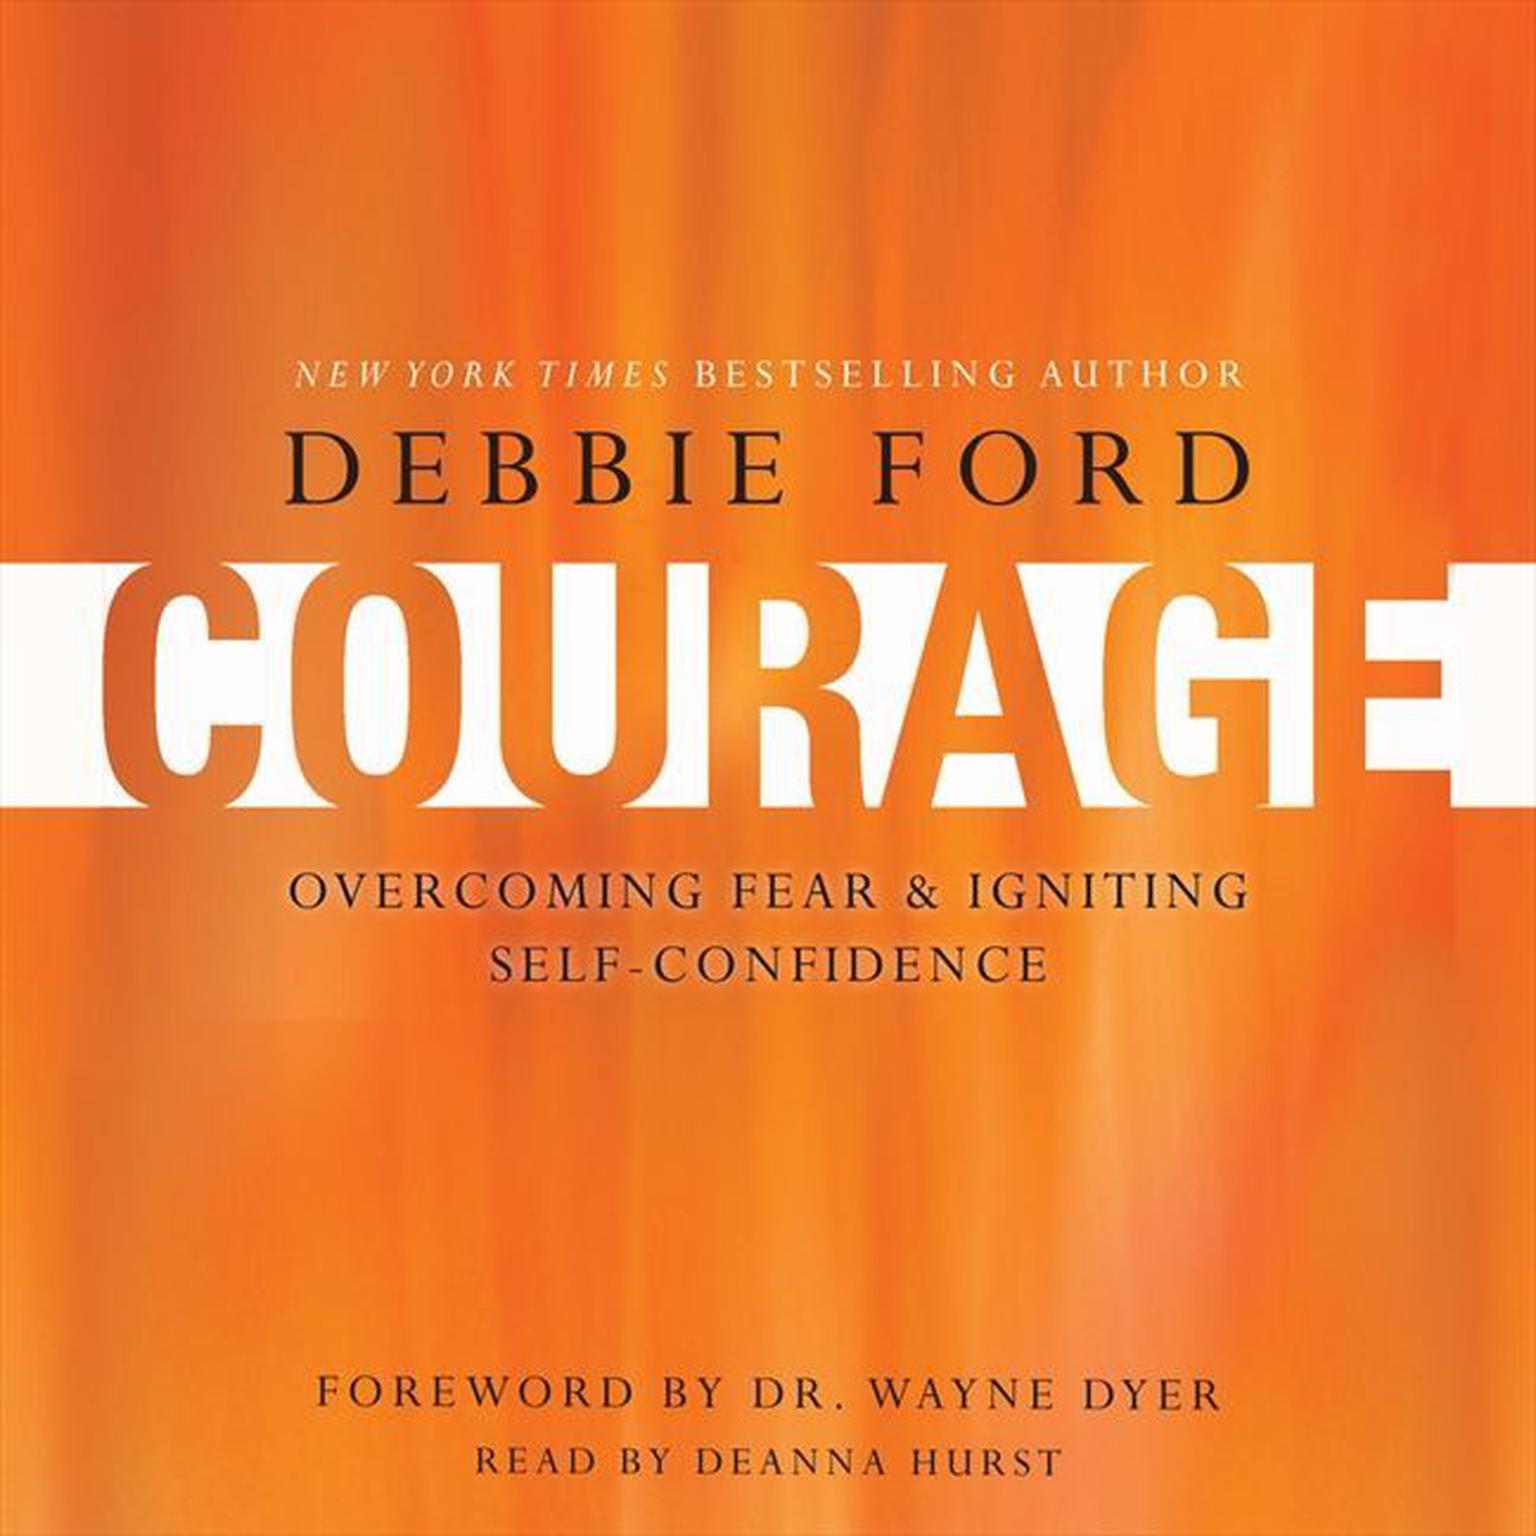 Courage: Overcoming Fear and Igniting Self-Confidence Audiobook, by Debbie Ford